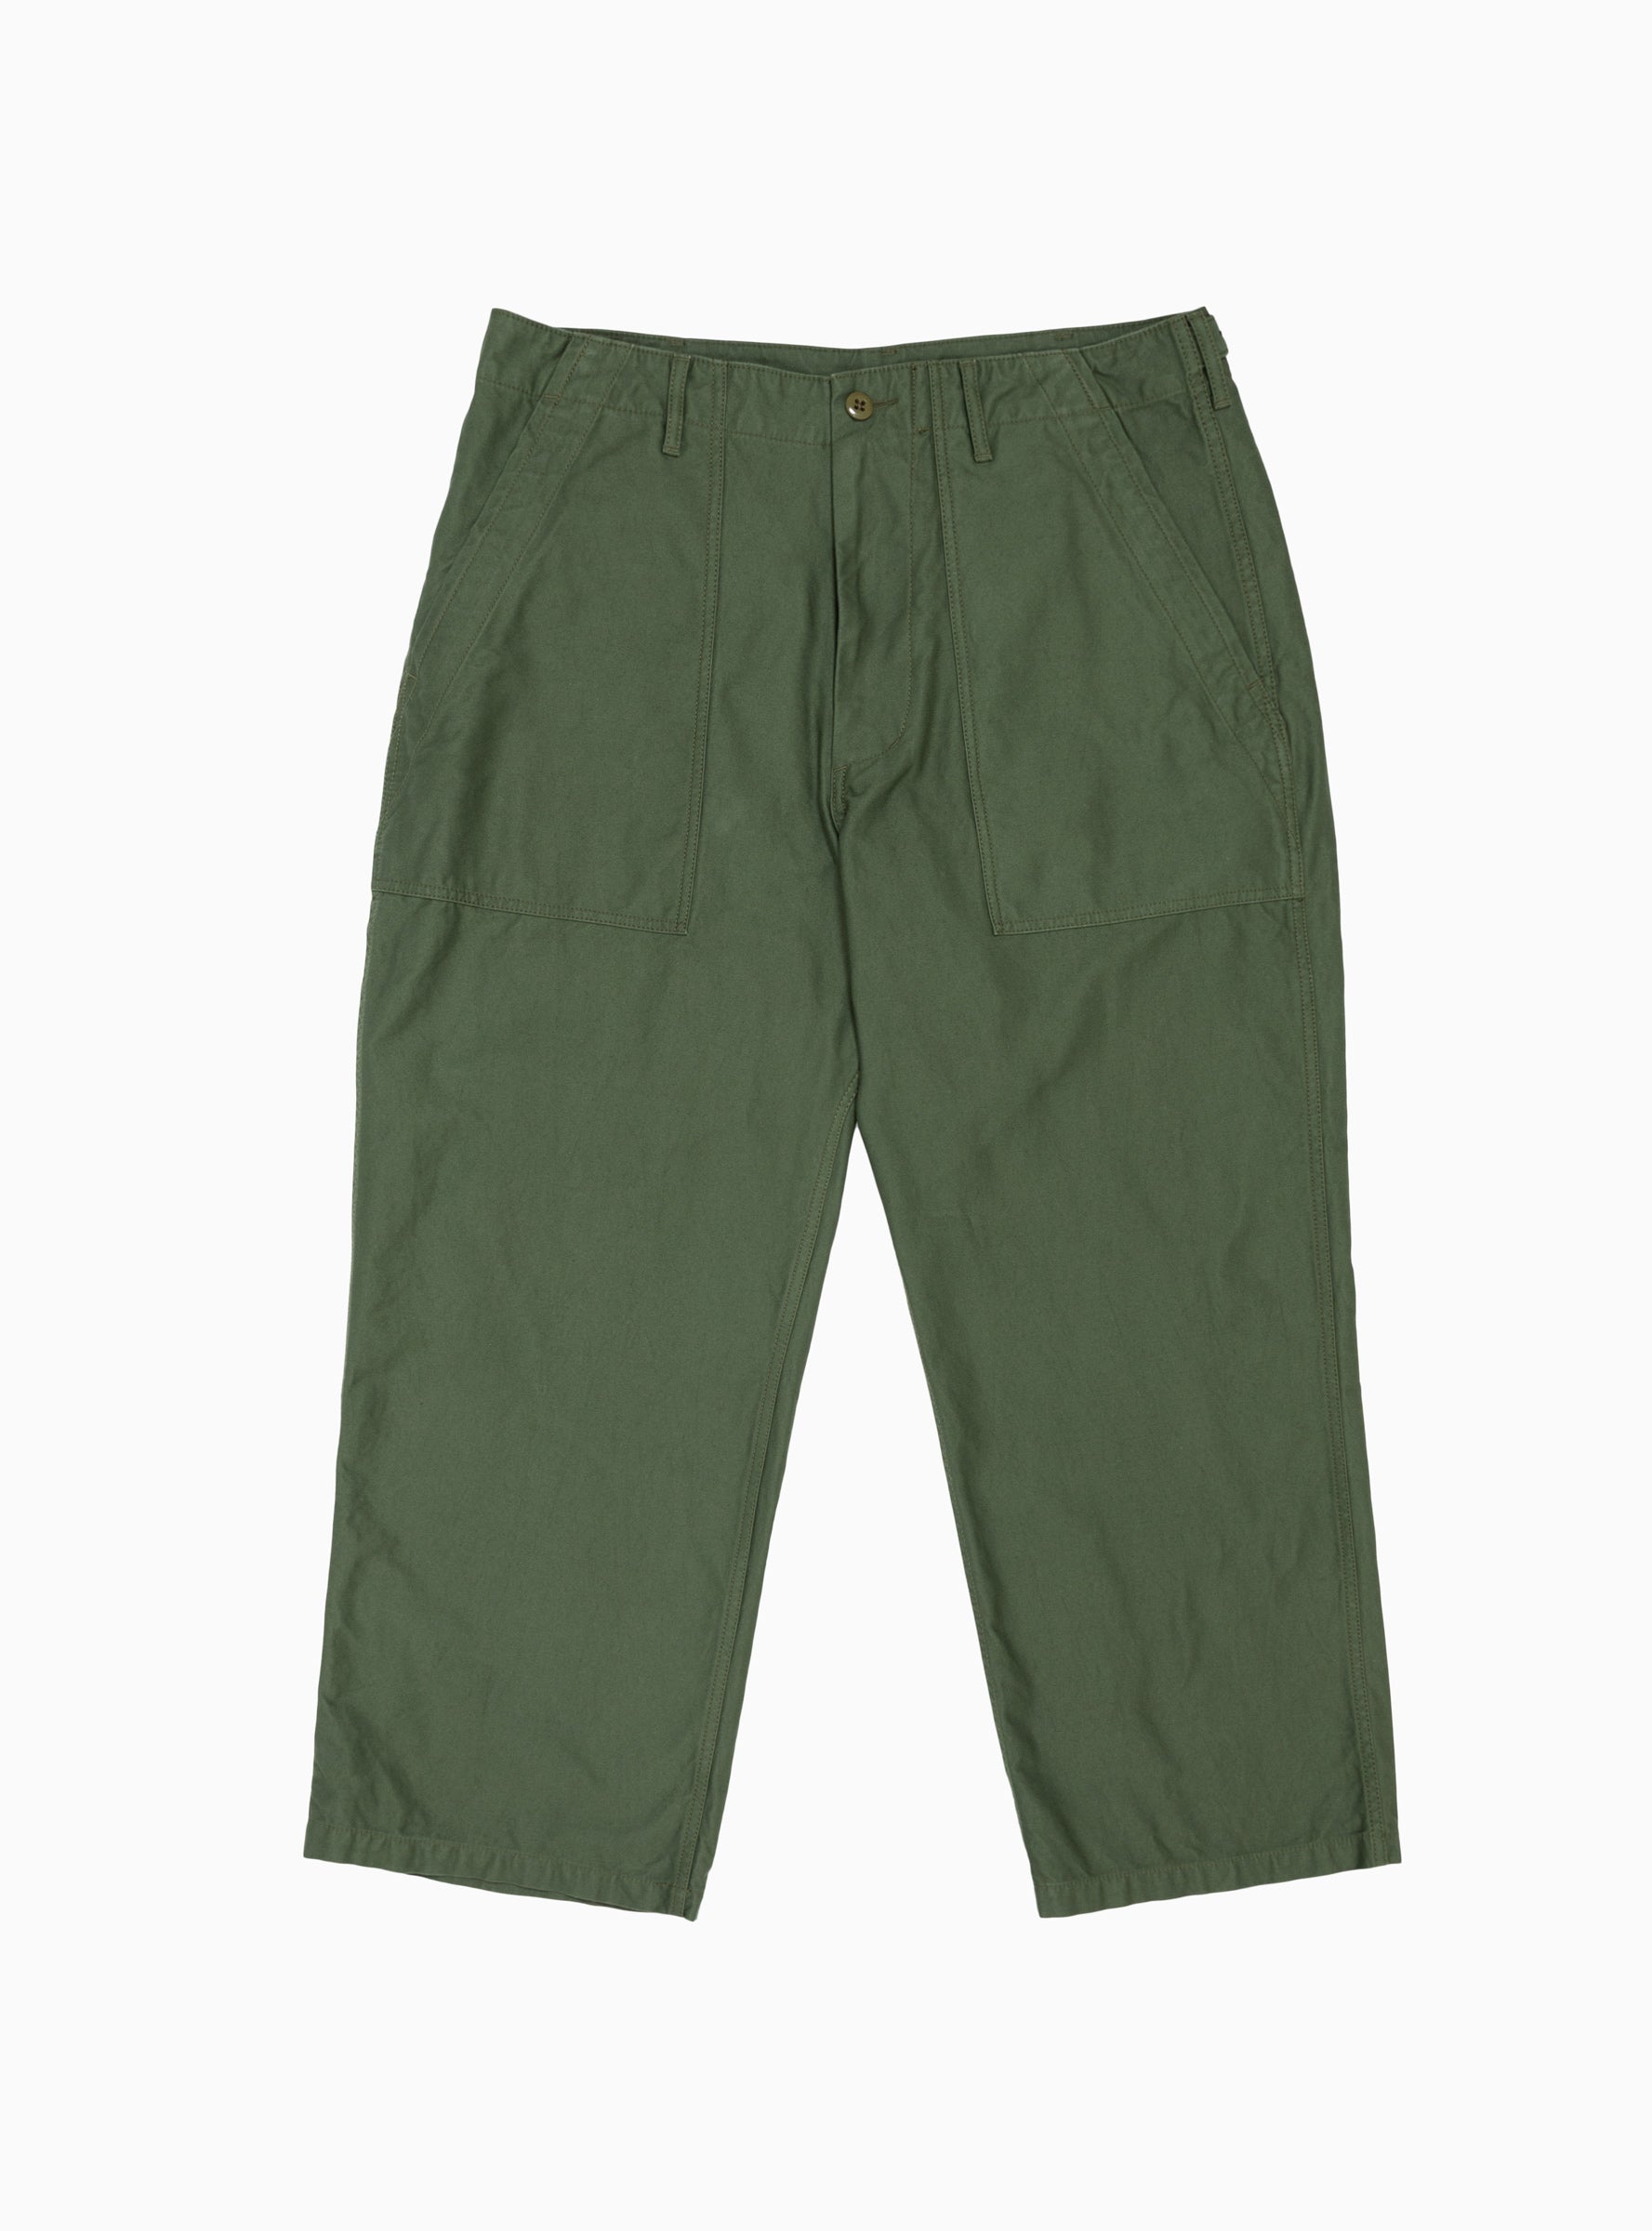 MIL Utility Trousers Olive Green by Beams Plus